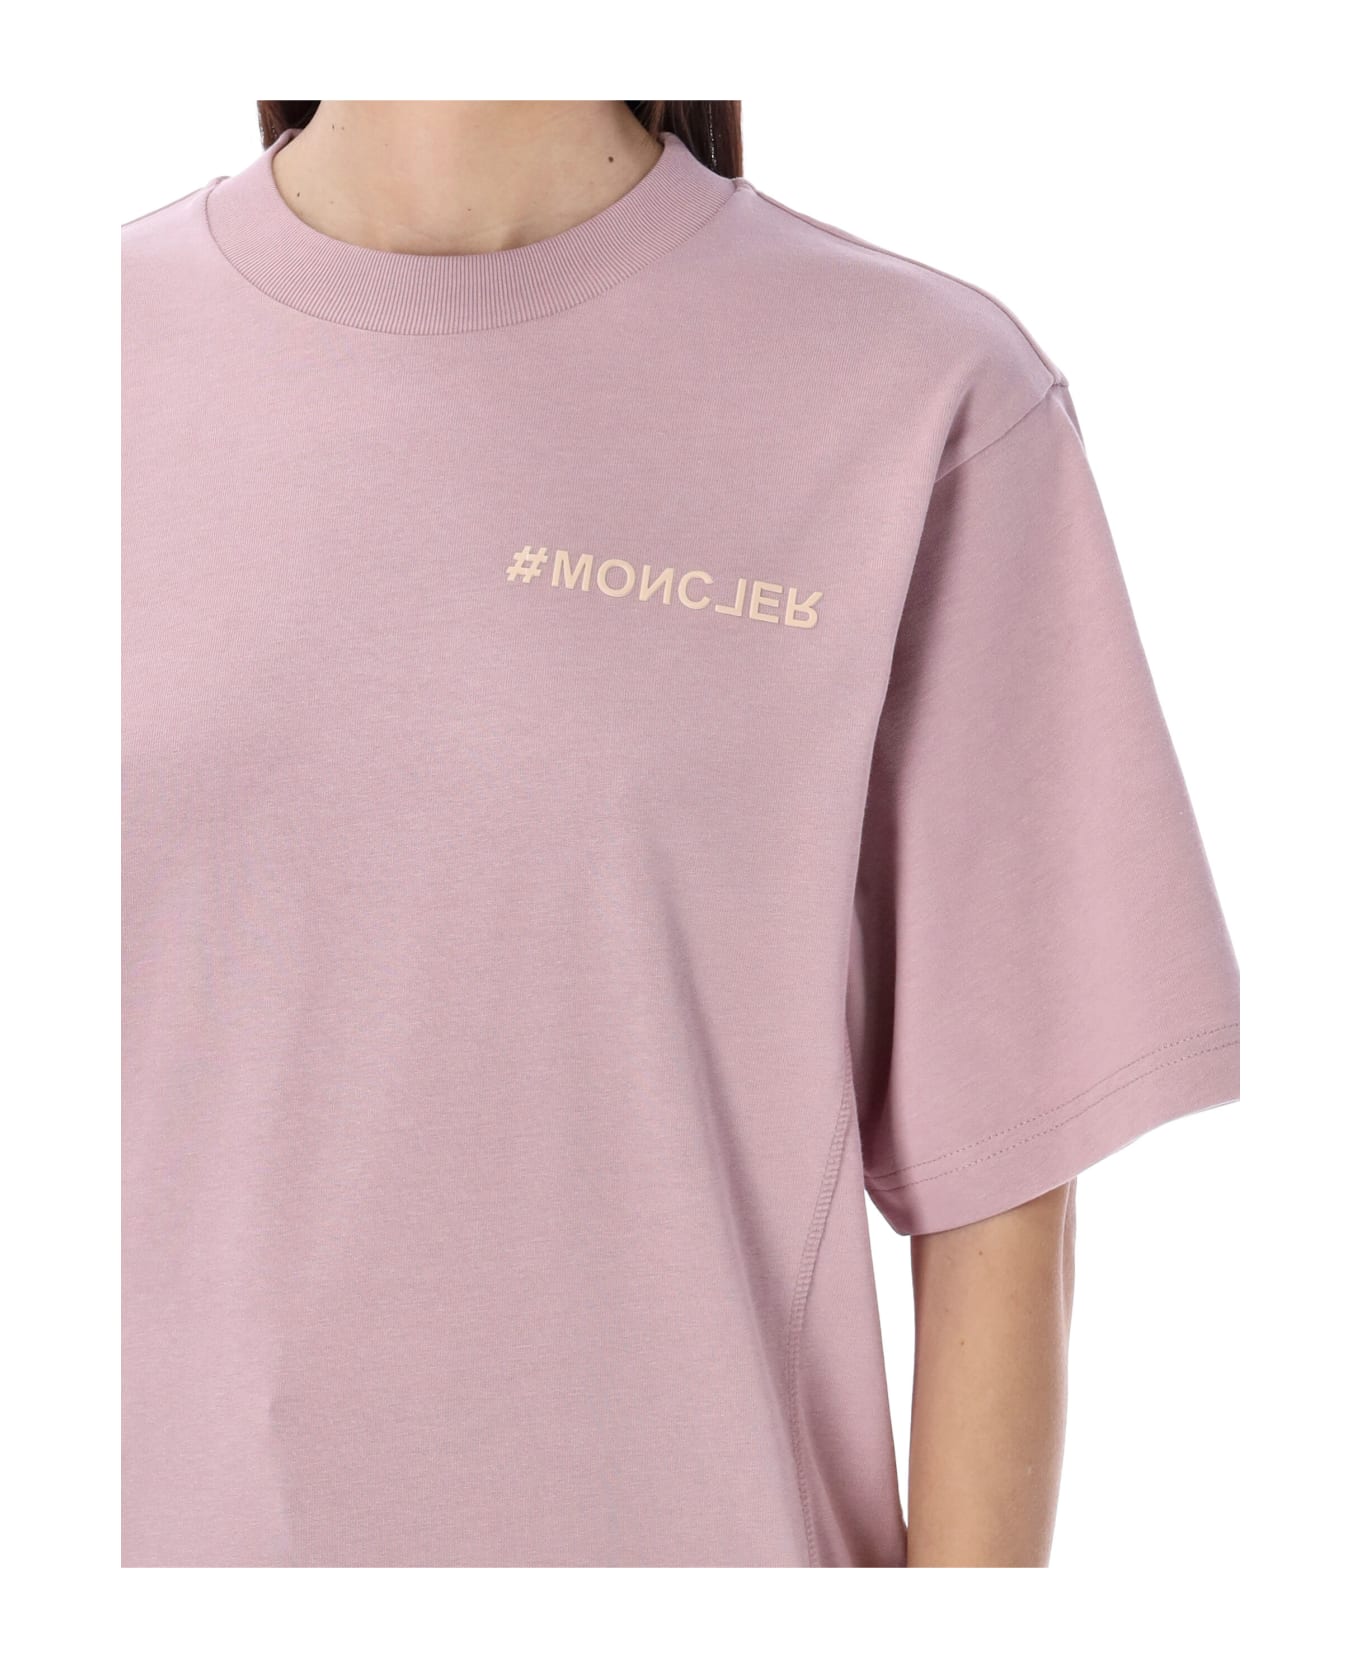 Moncler Grenoble T-shirt Tmm - PINK Tシャツ